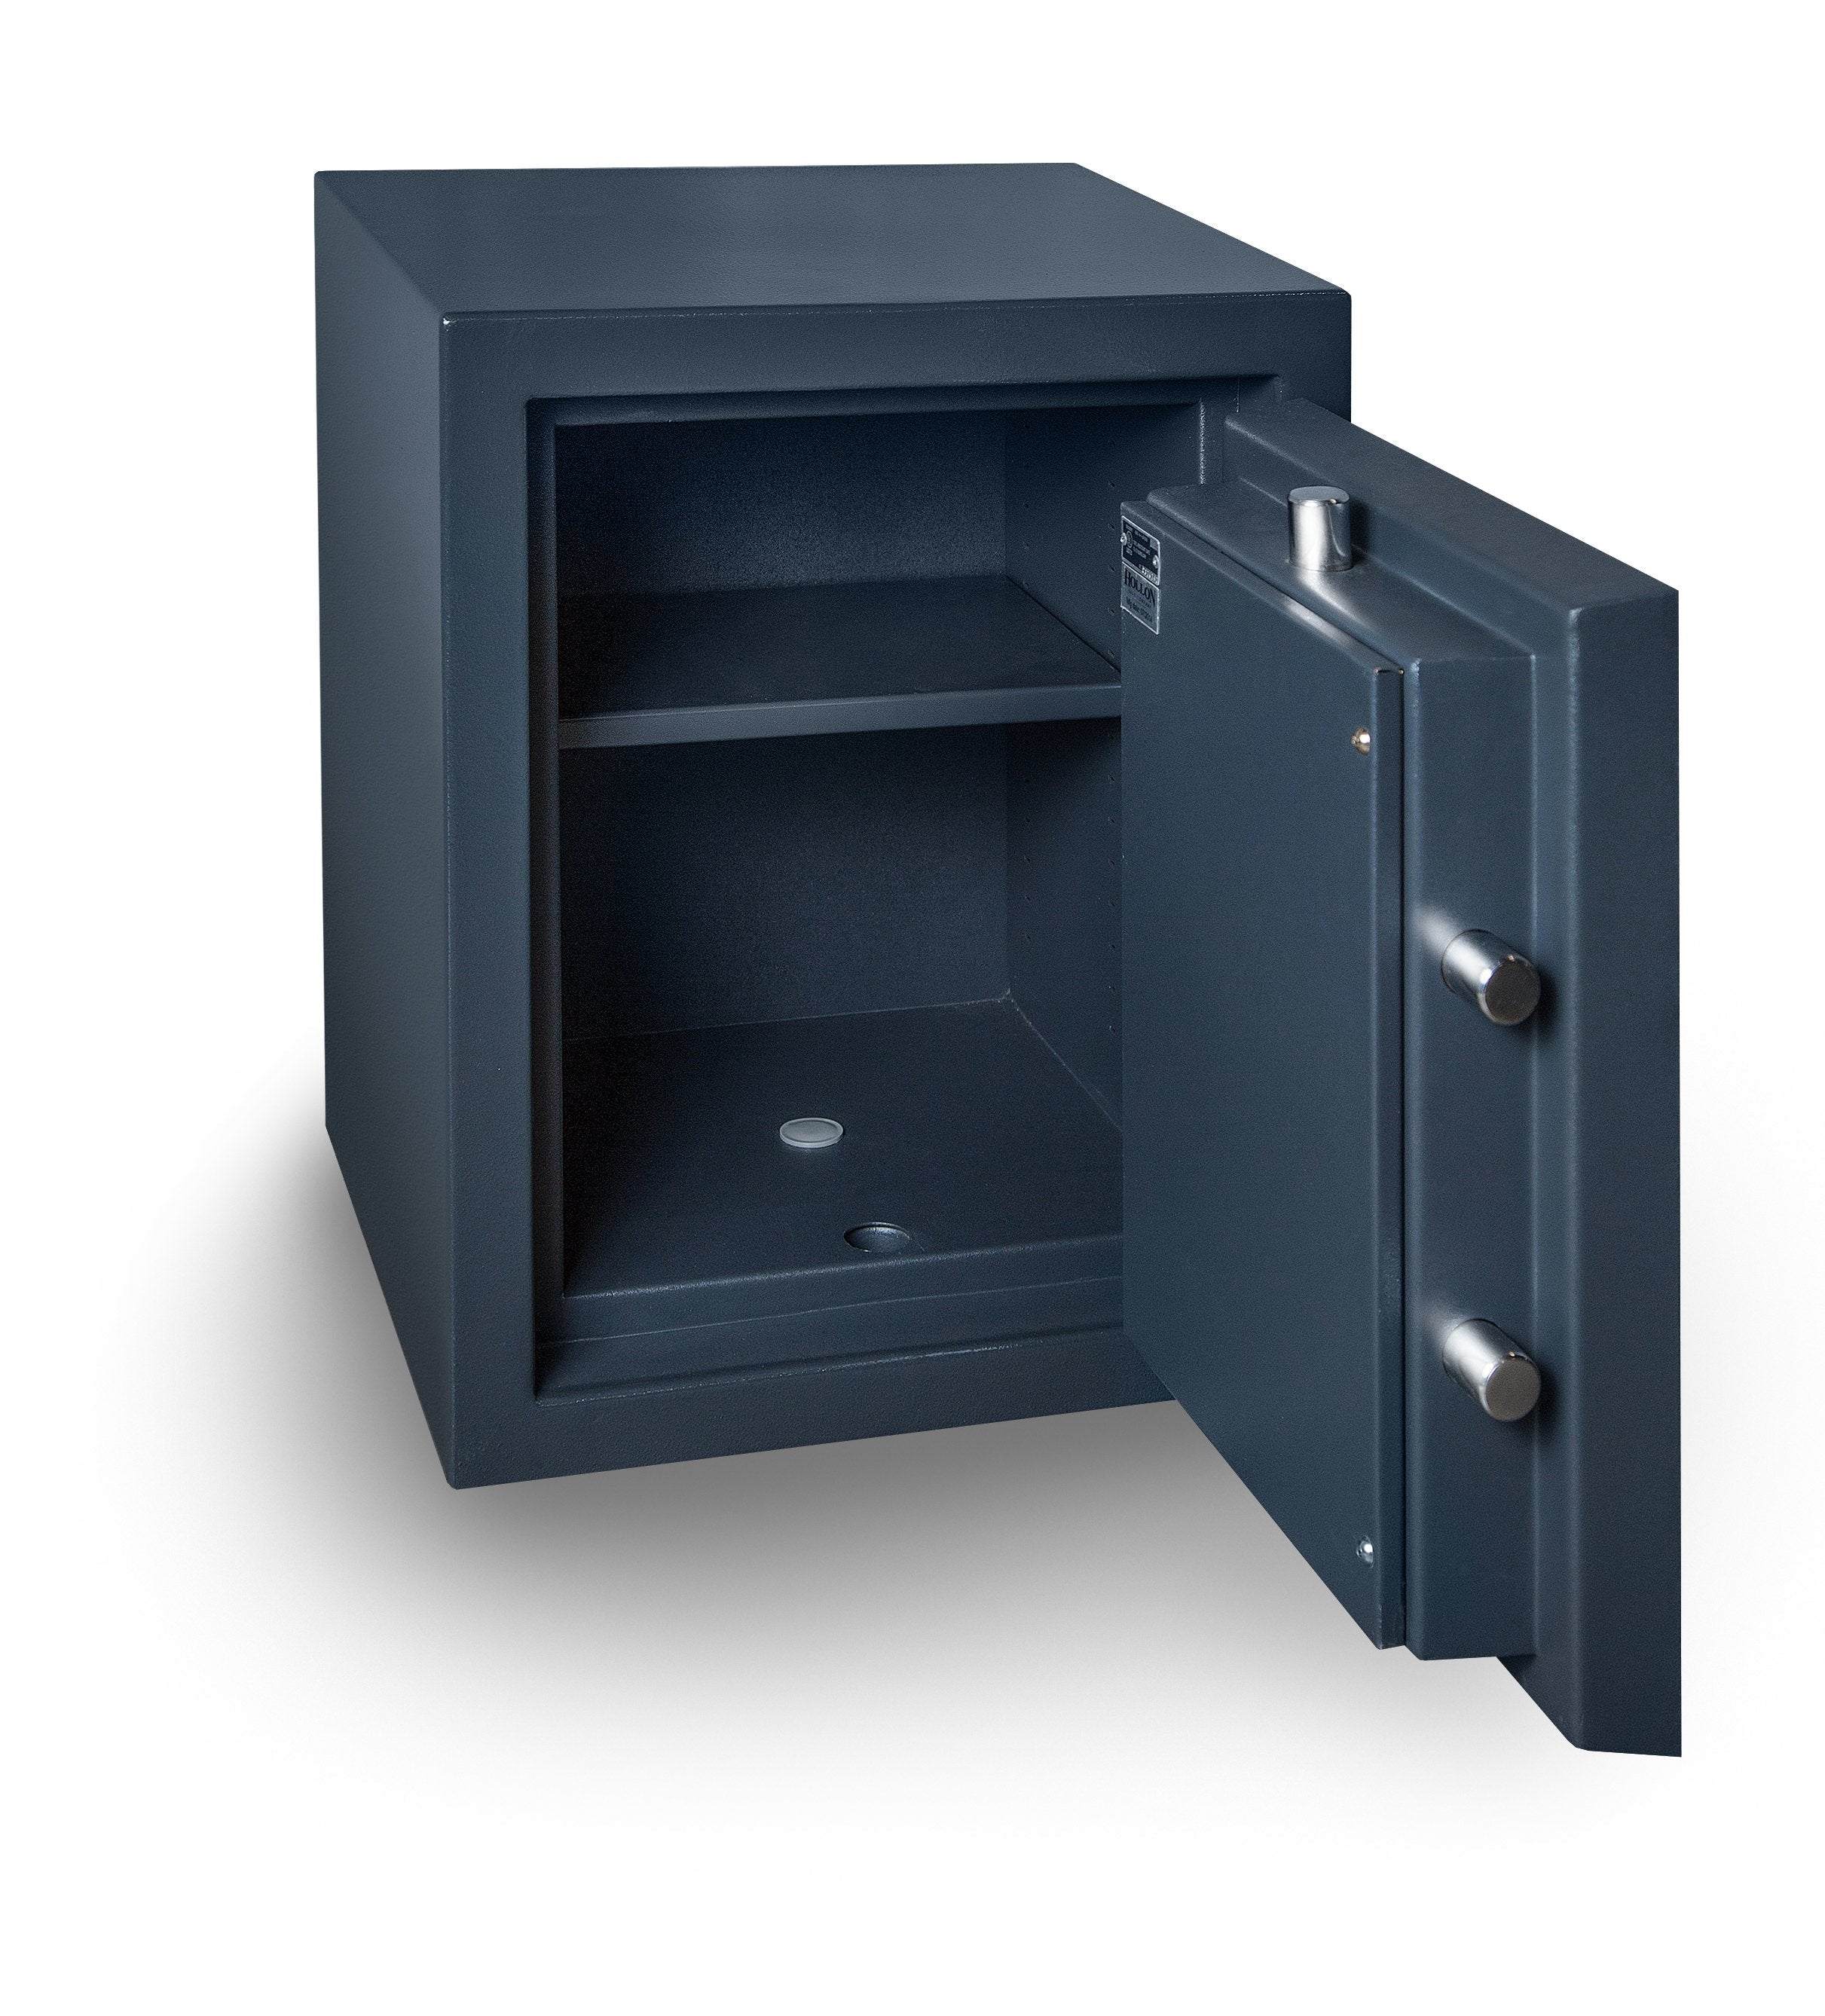 TL-15 Rated Safe - PM-1814E